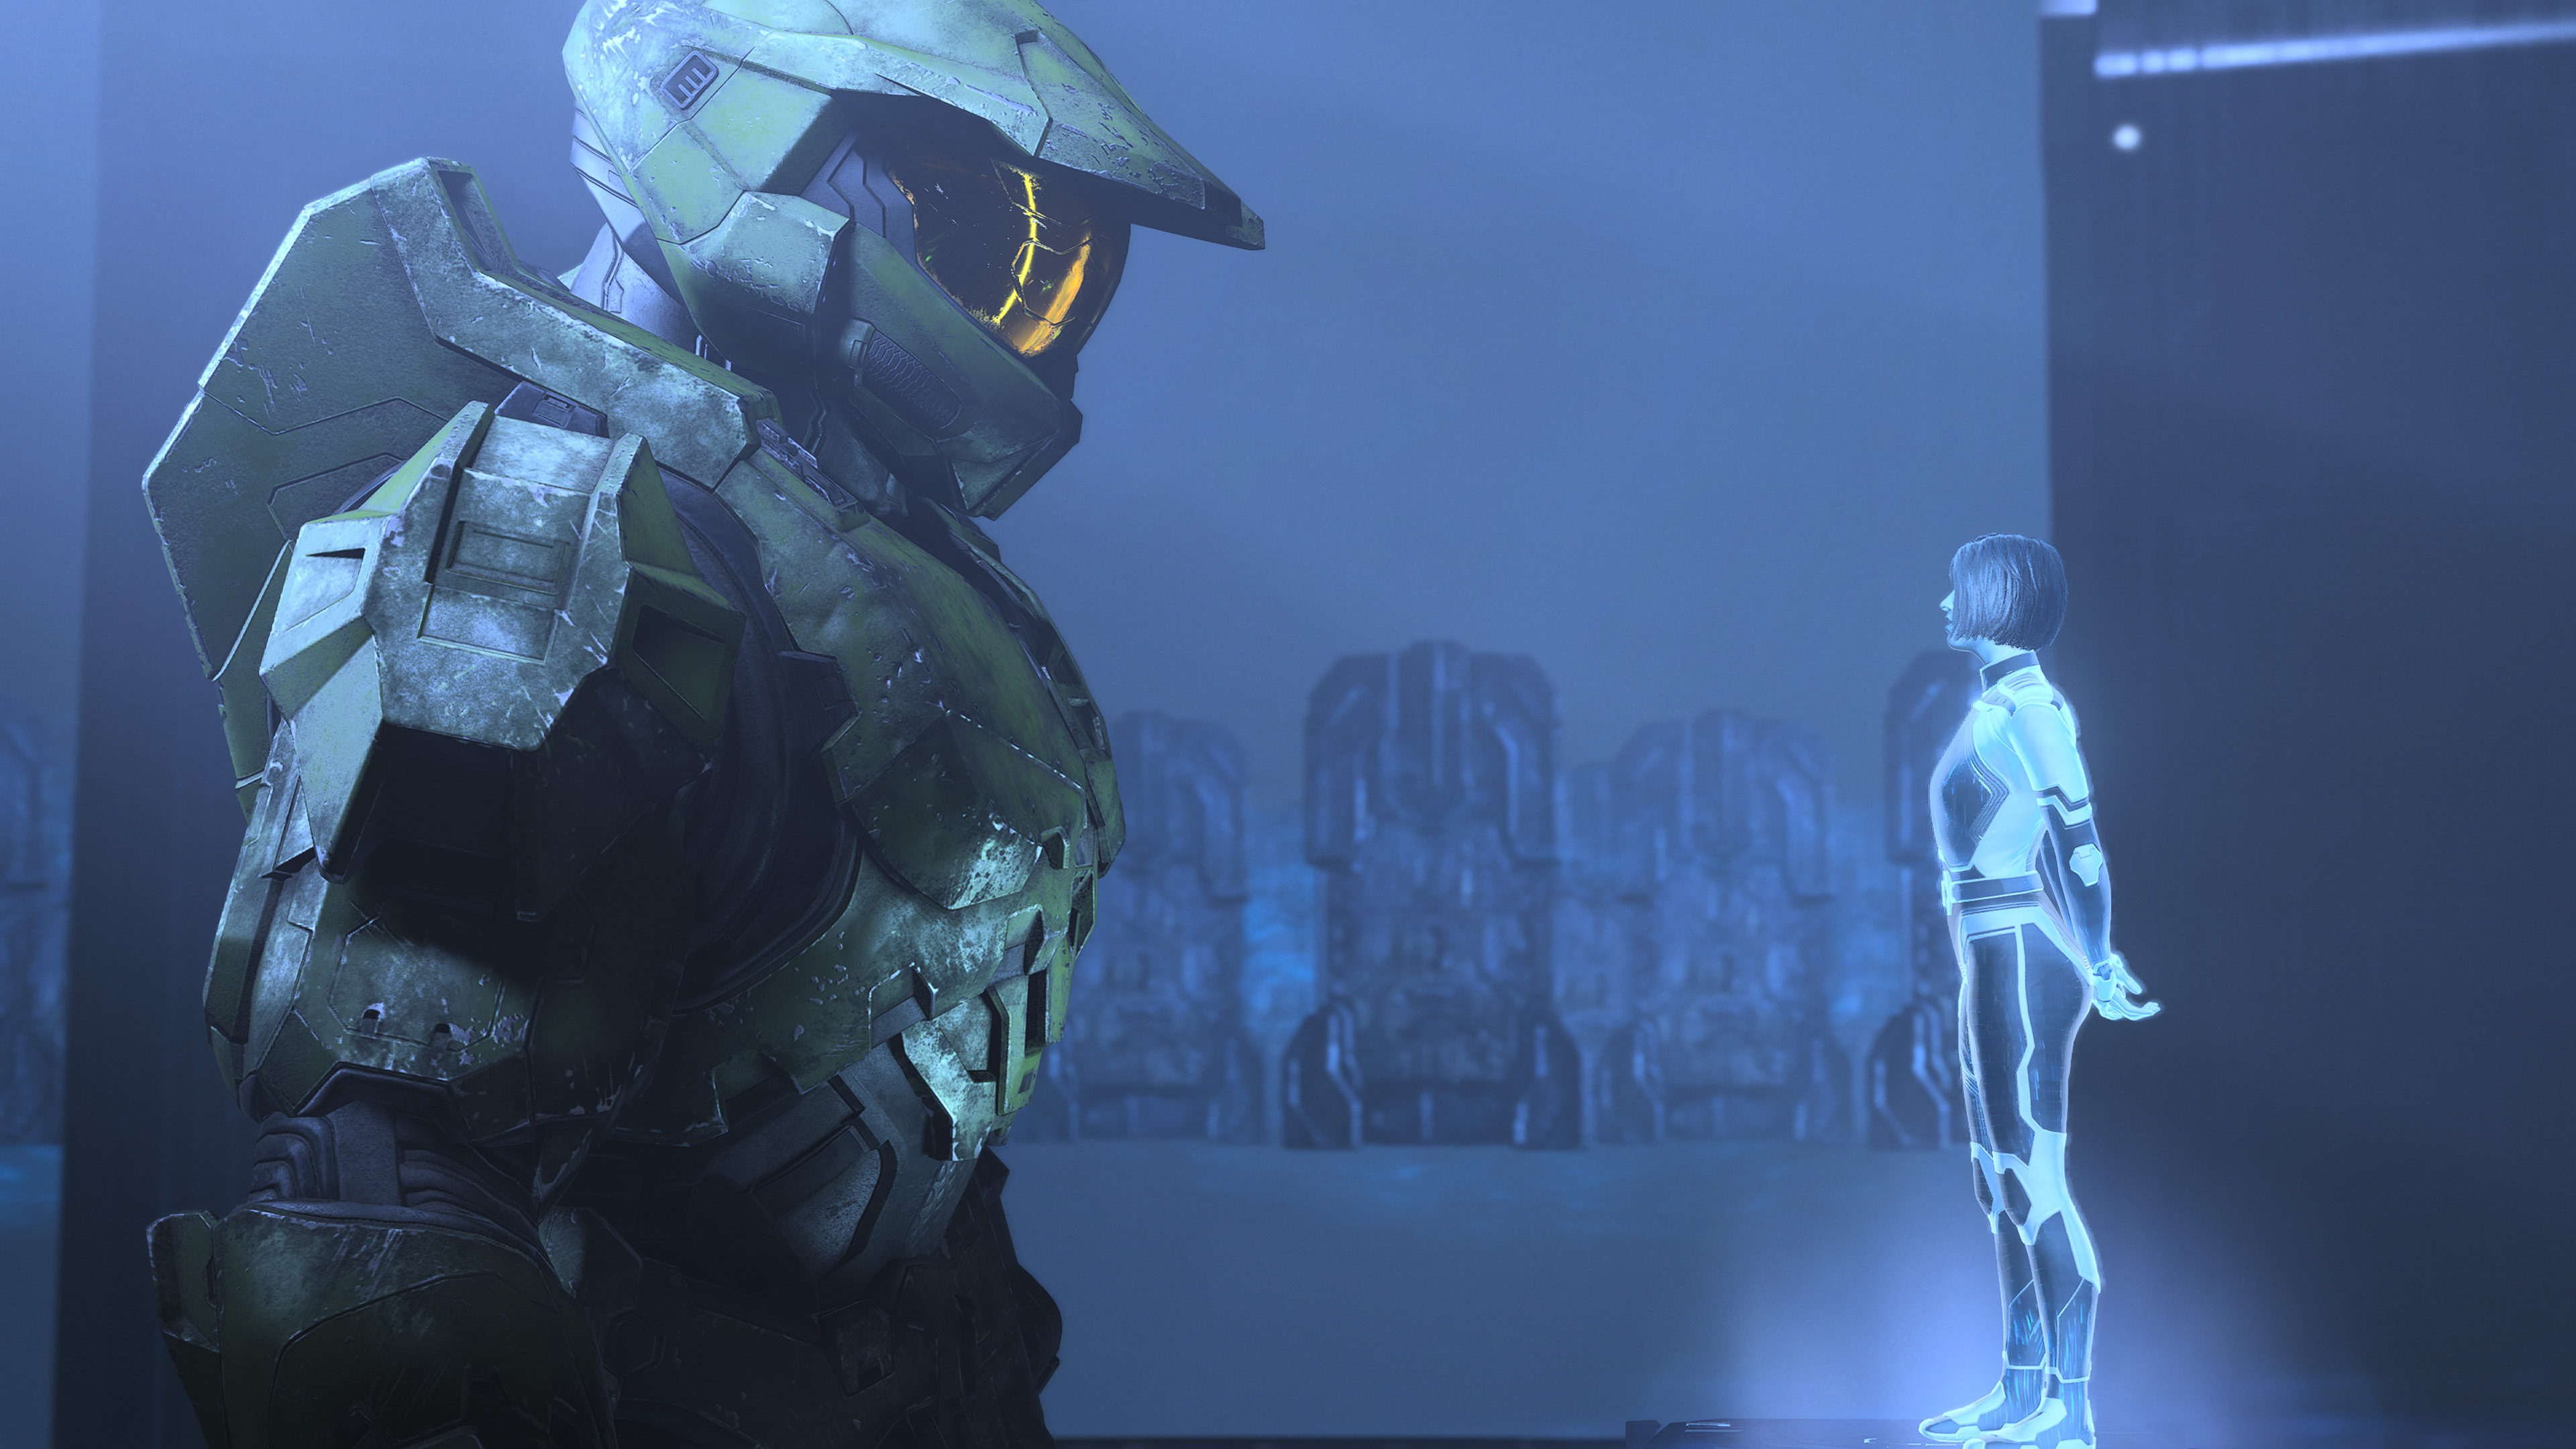 Master Chief and the Weapon (Cortana) in Halo Infinite